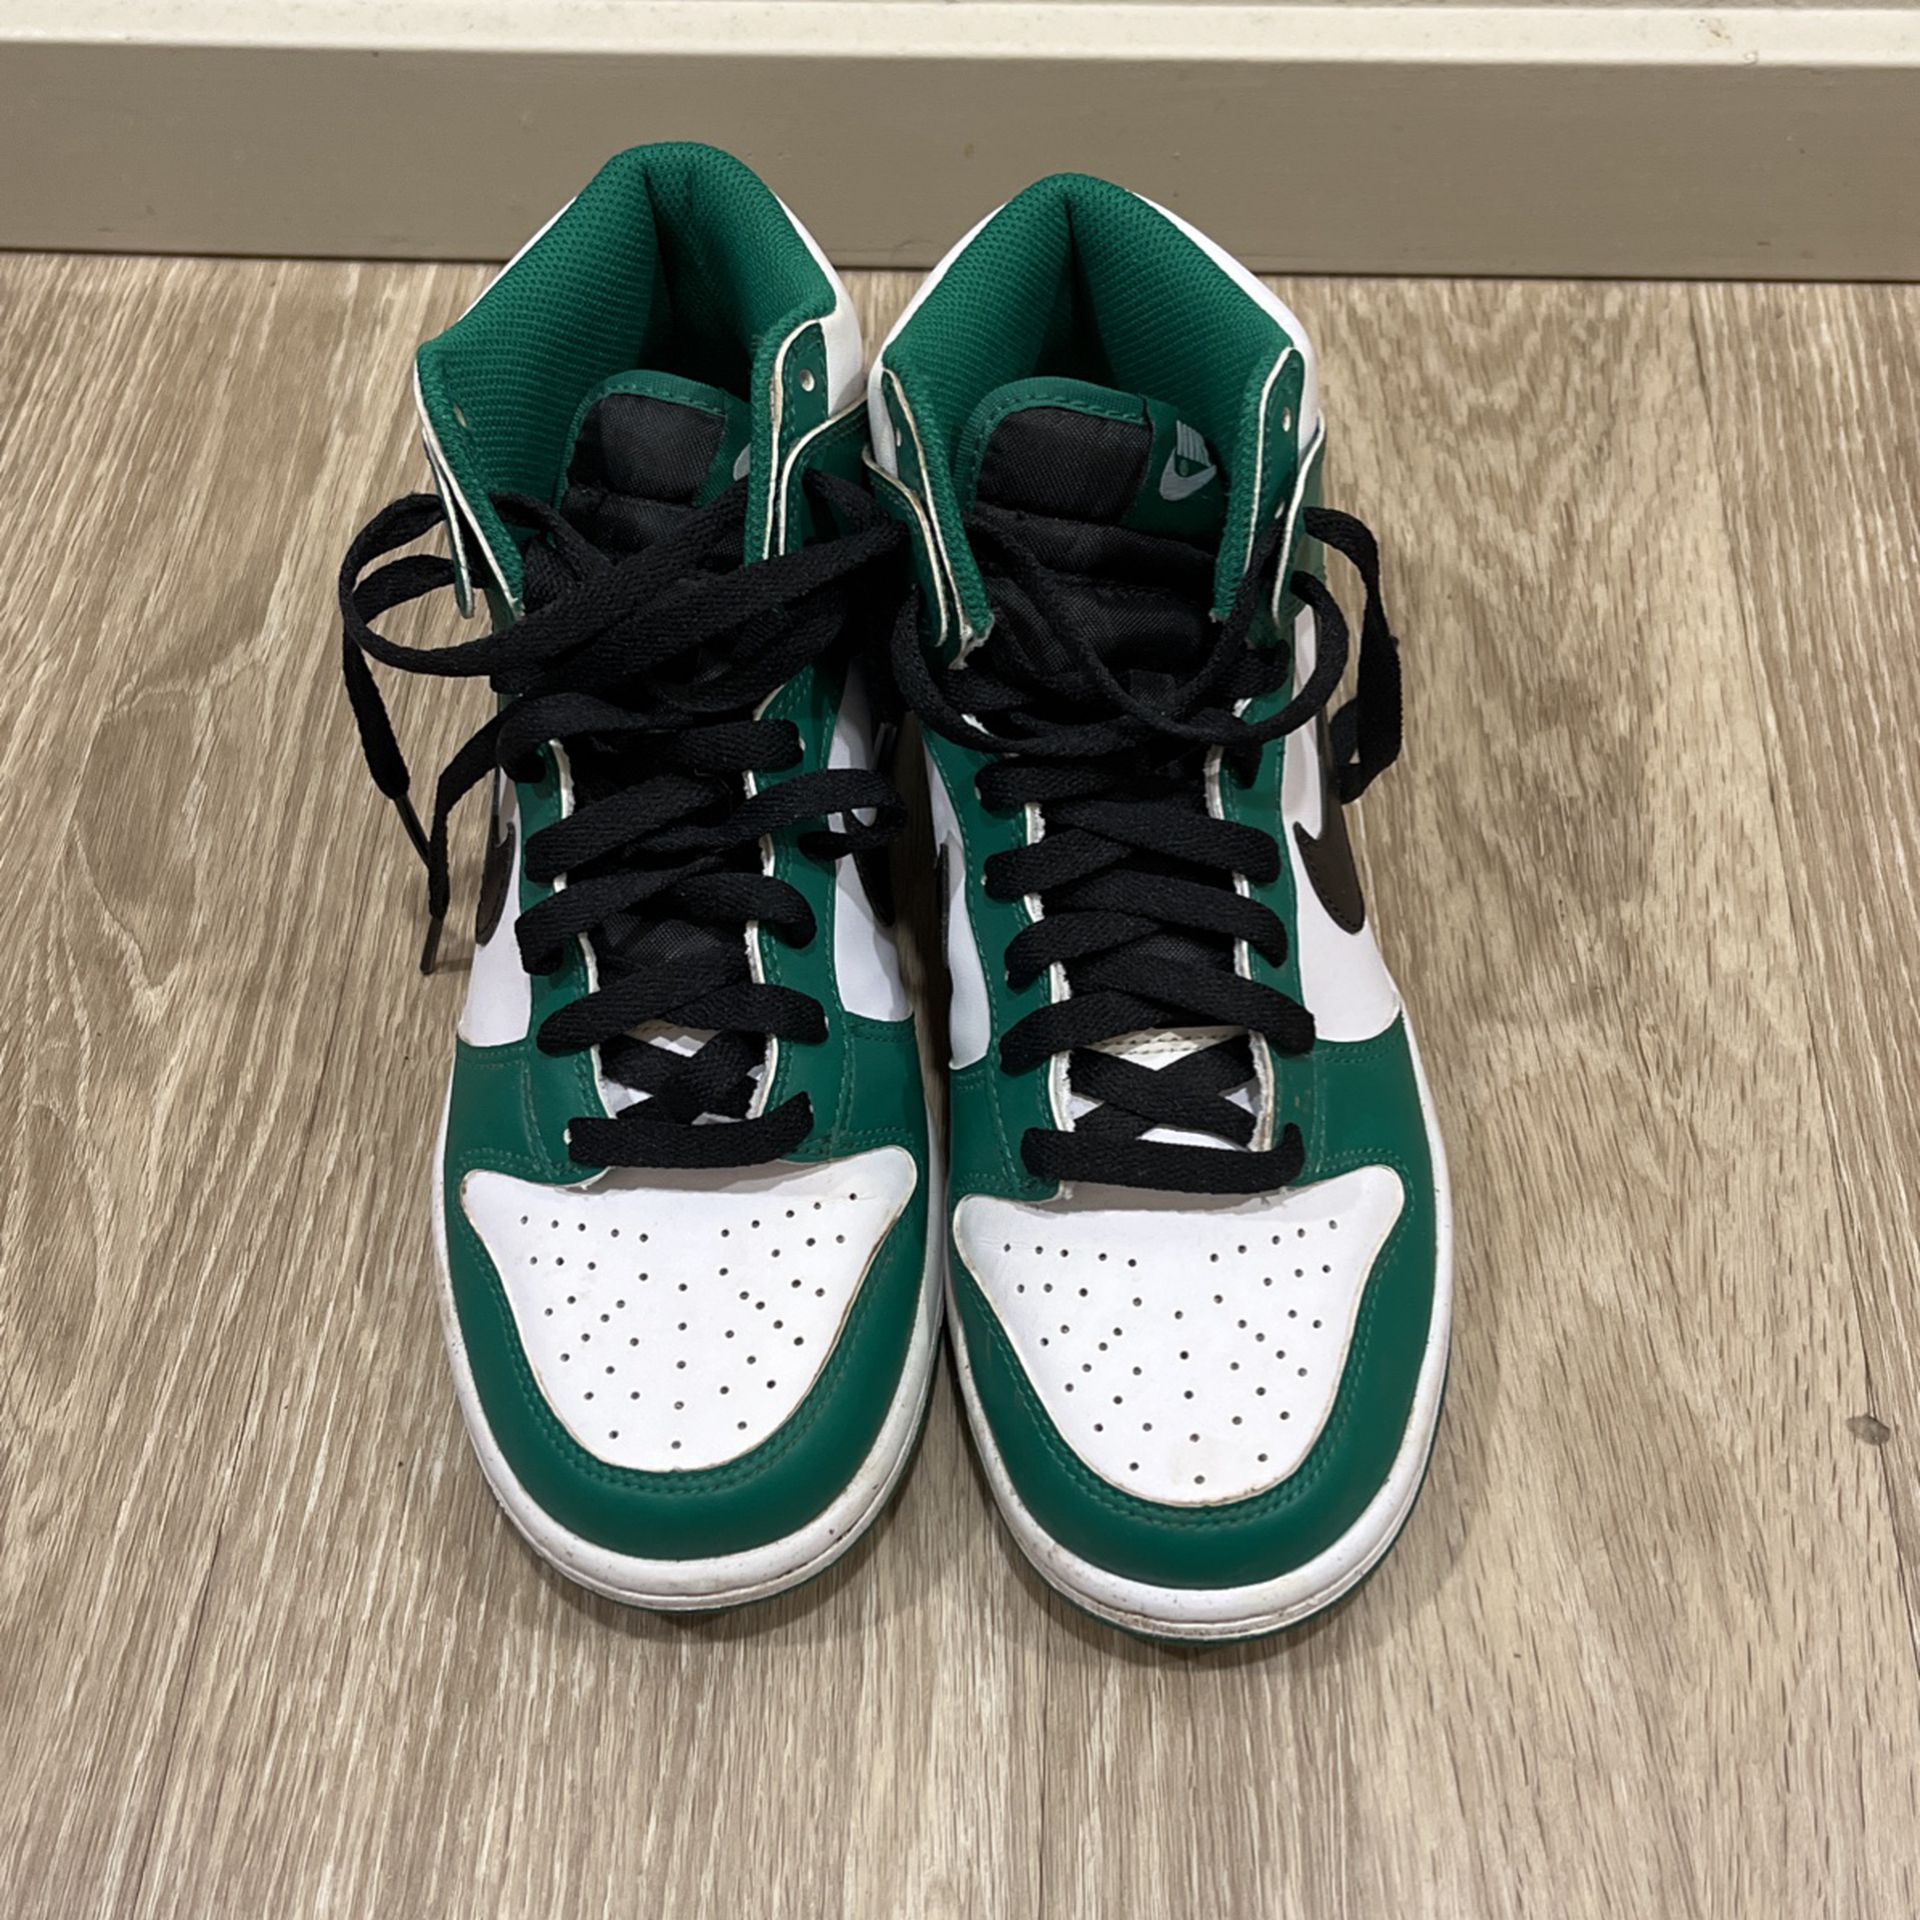 Green Nike Dunks Size 5.5y 